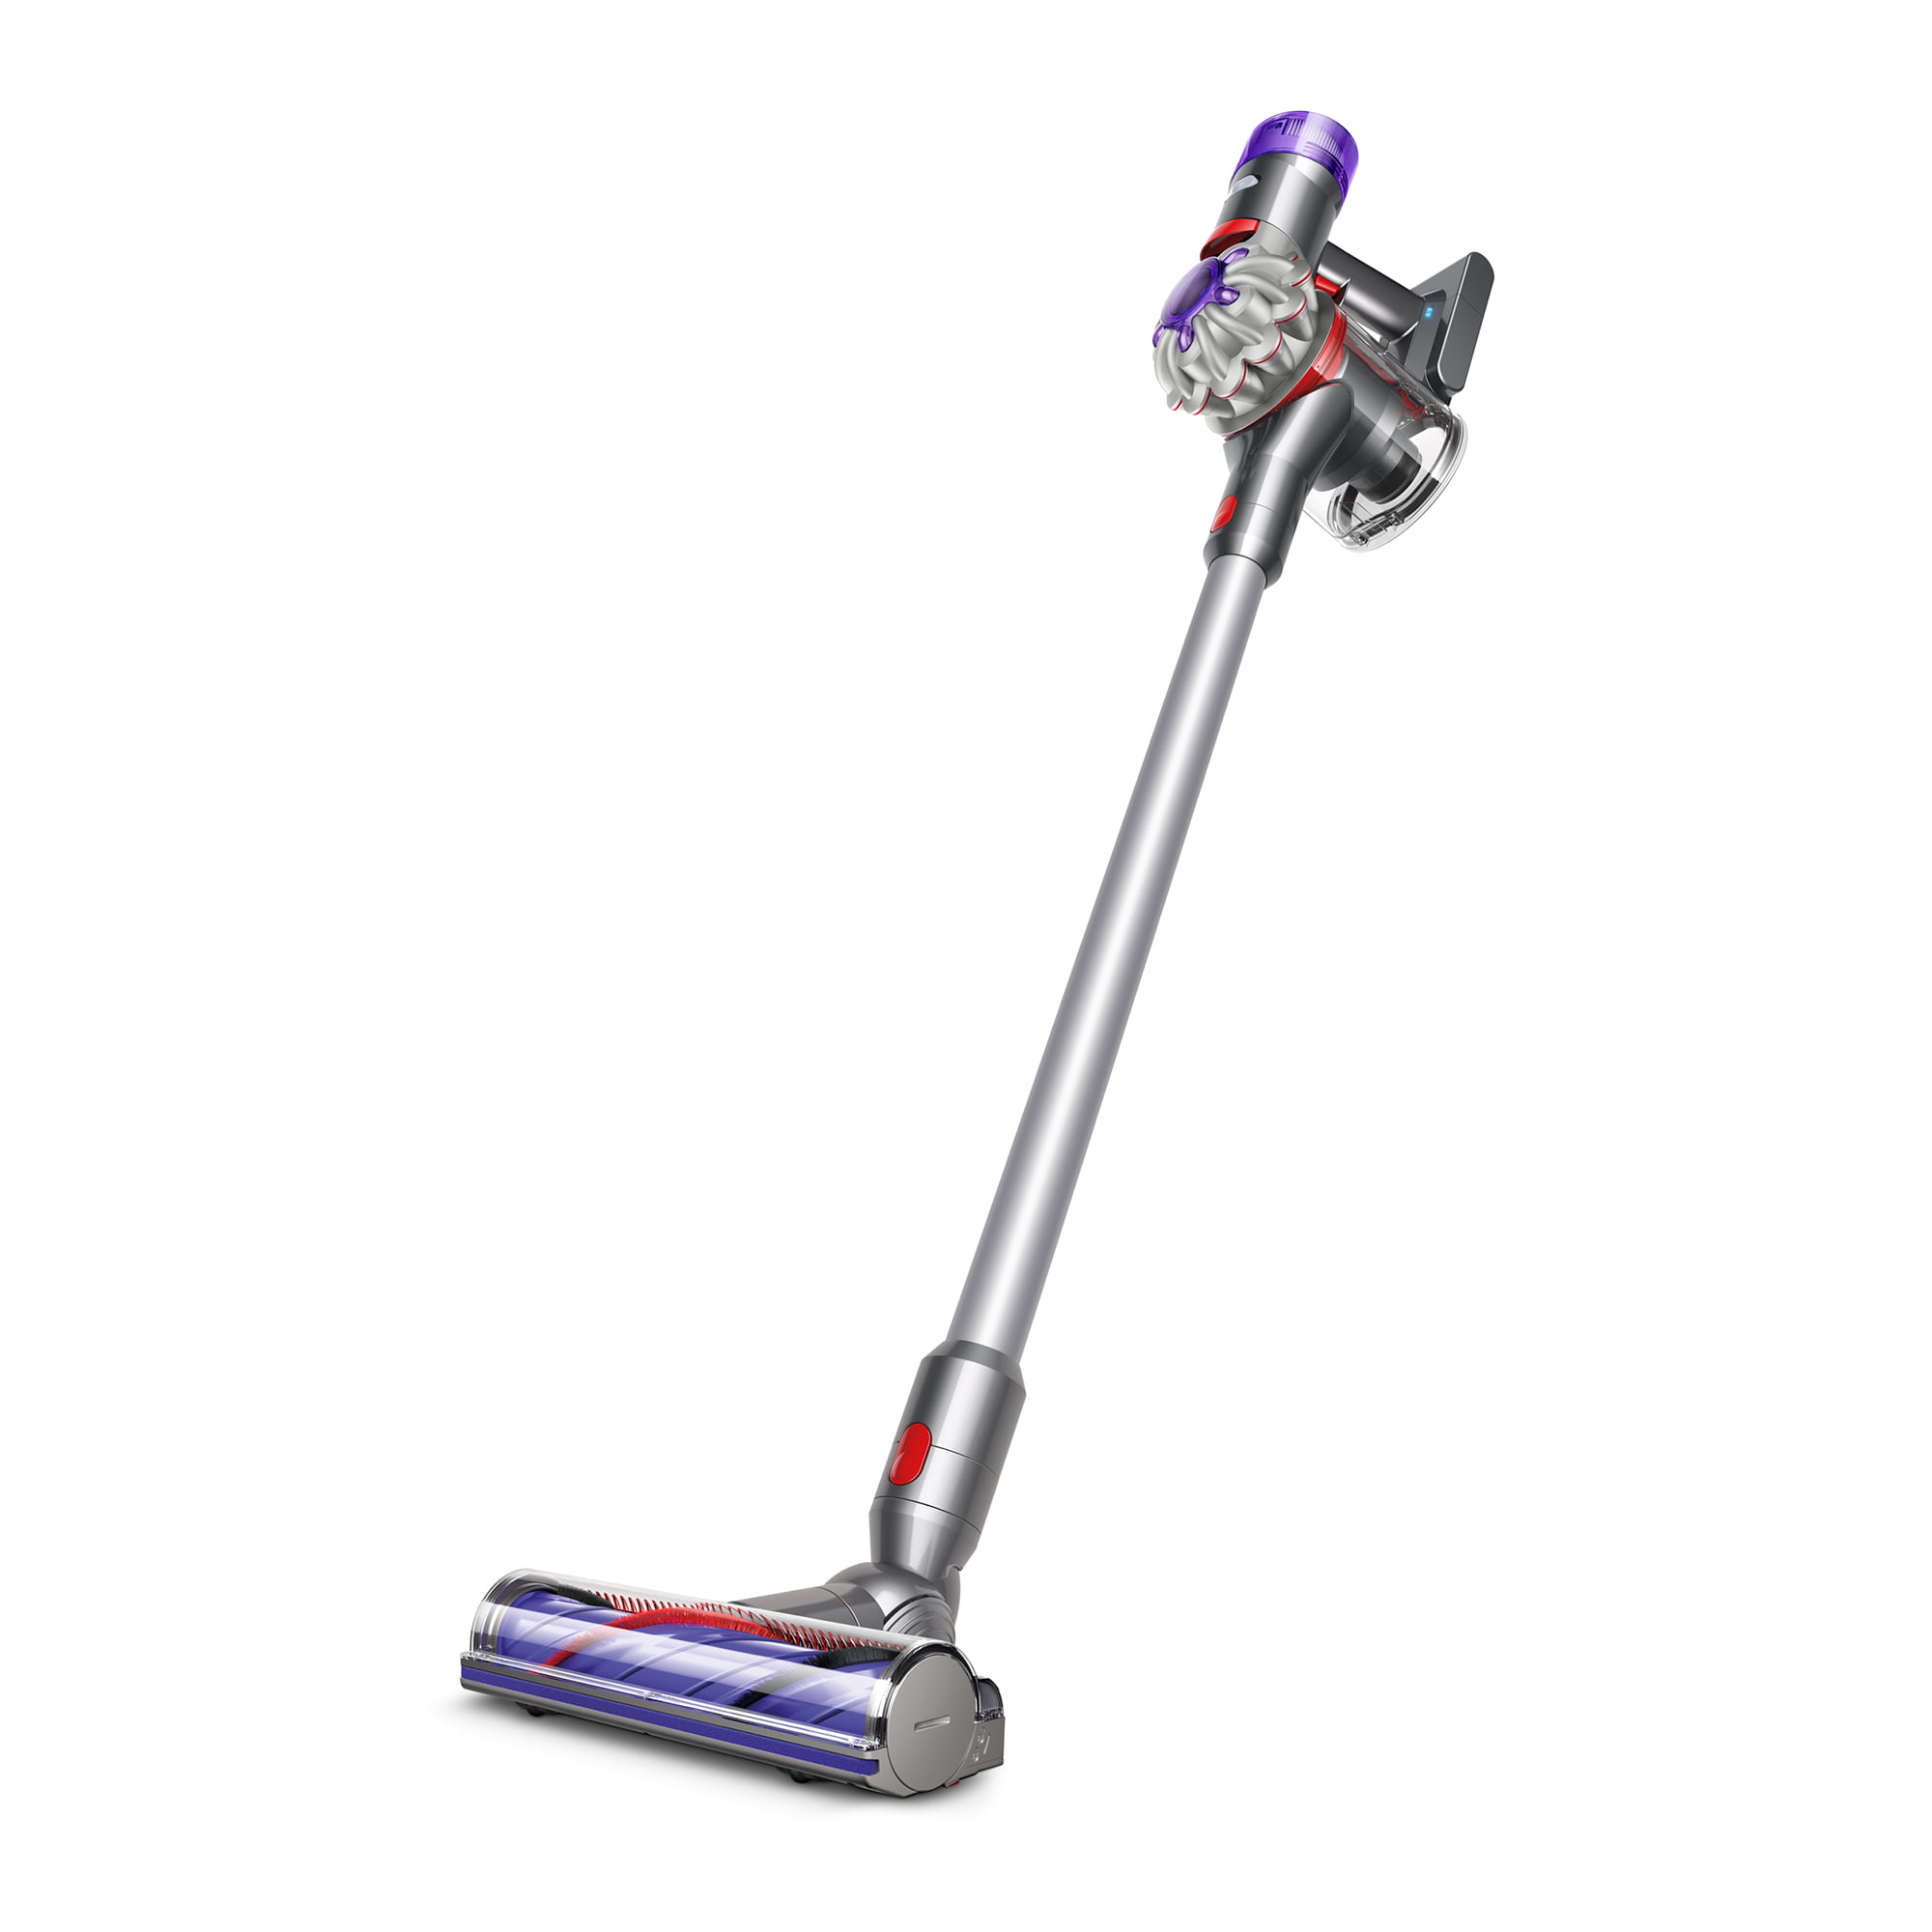 Dyson V7 Advanced Cordless Vacuum Cleaner (silver) $250 + Free Shipping